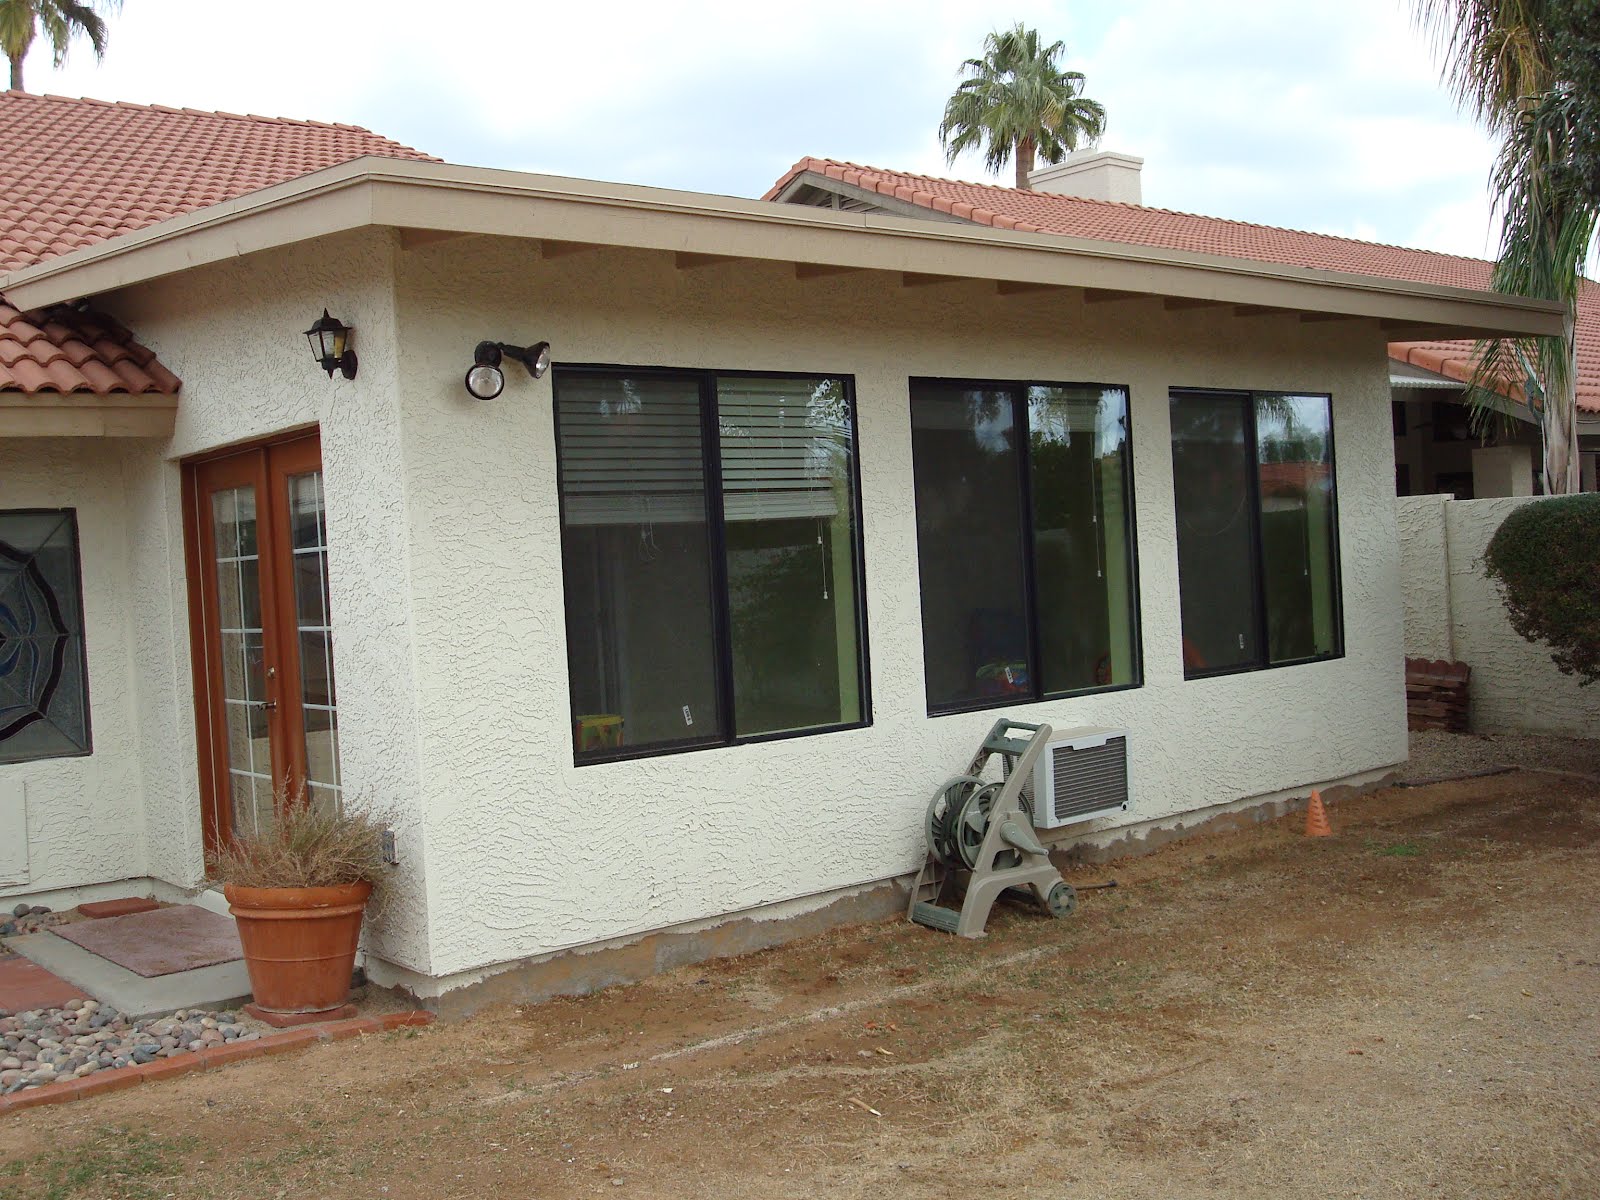 Room addition in Scottsdale Arizona with an air conditioning unit that cool and heat the new living space